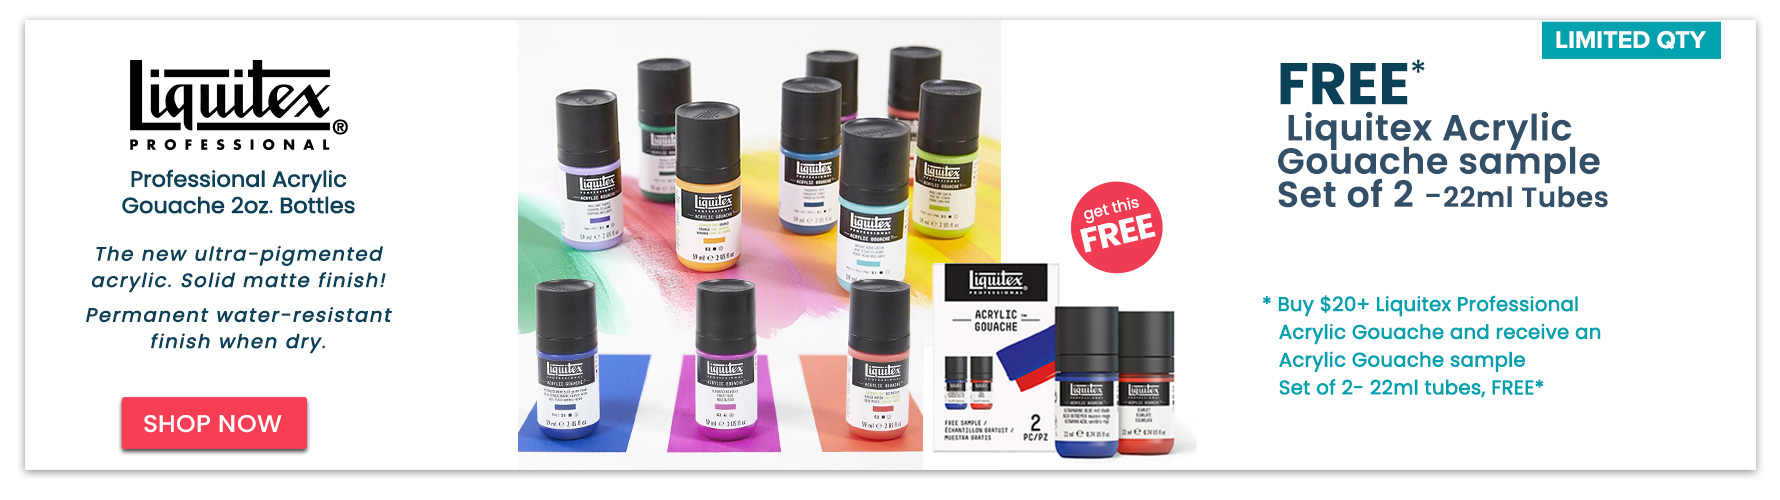  Liquitex Professional Acrylic Gouache + Special Offer